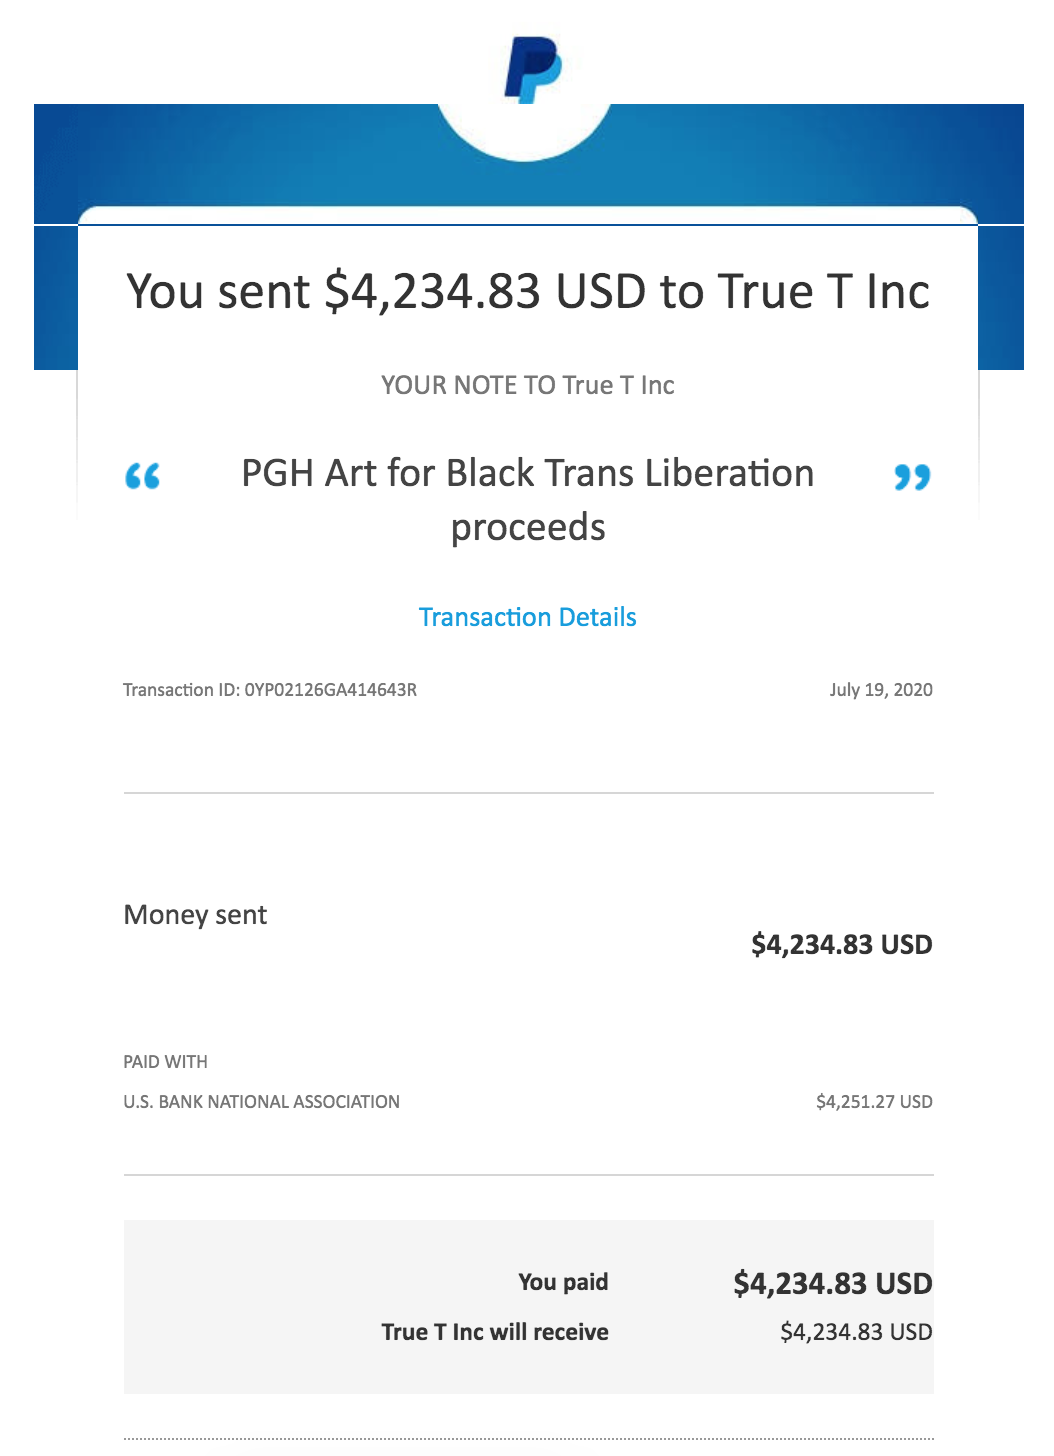 PayPal donation receipt to True T